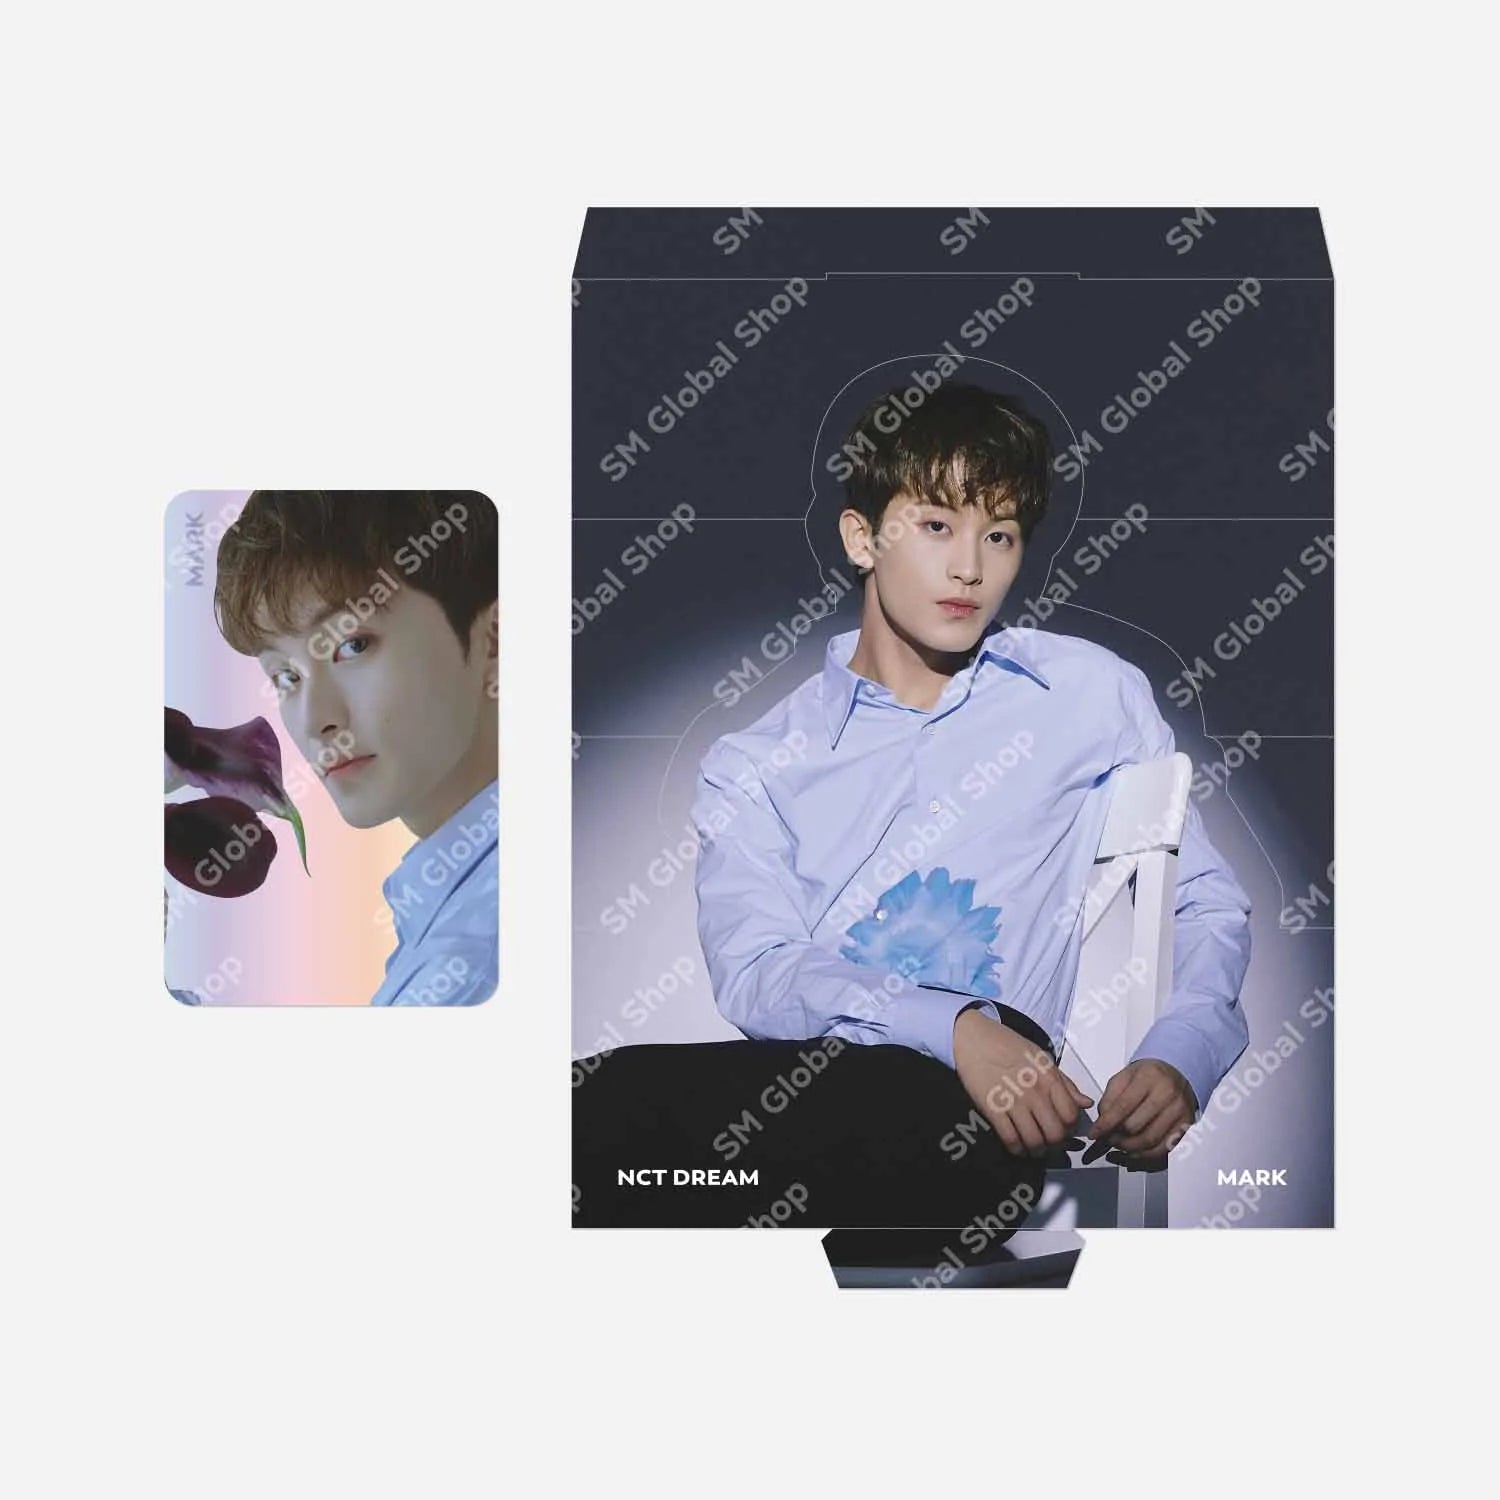 NCT DREAM STARRY DAYDREAM OFFICIAL MD - 02. HOLOGRAM PHOTO CARD SET